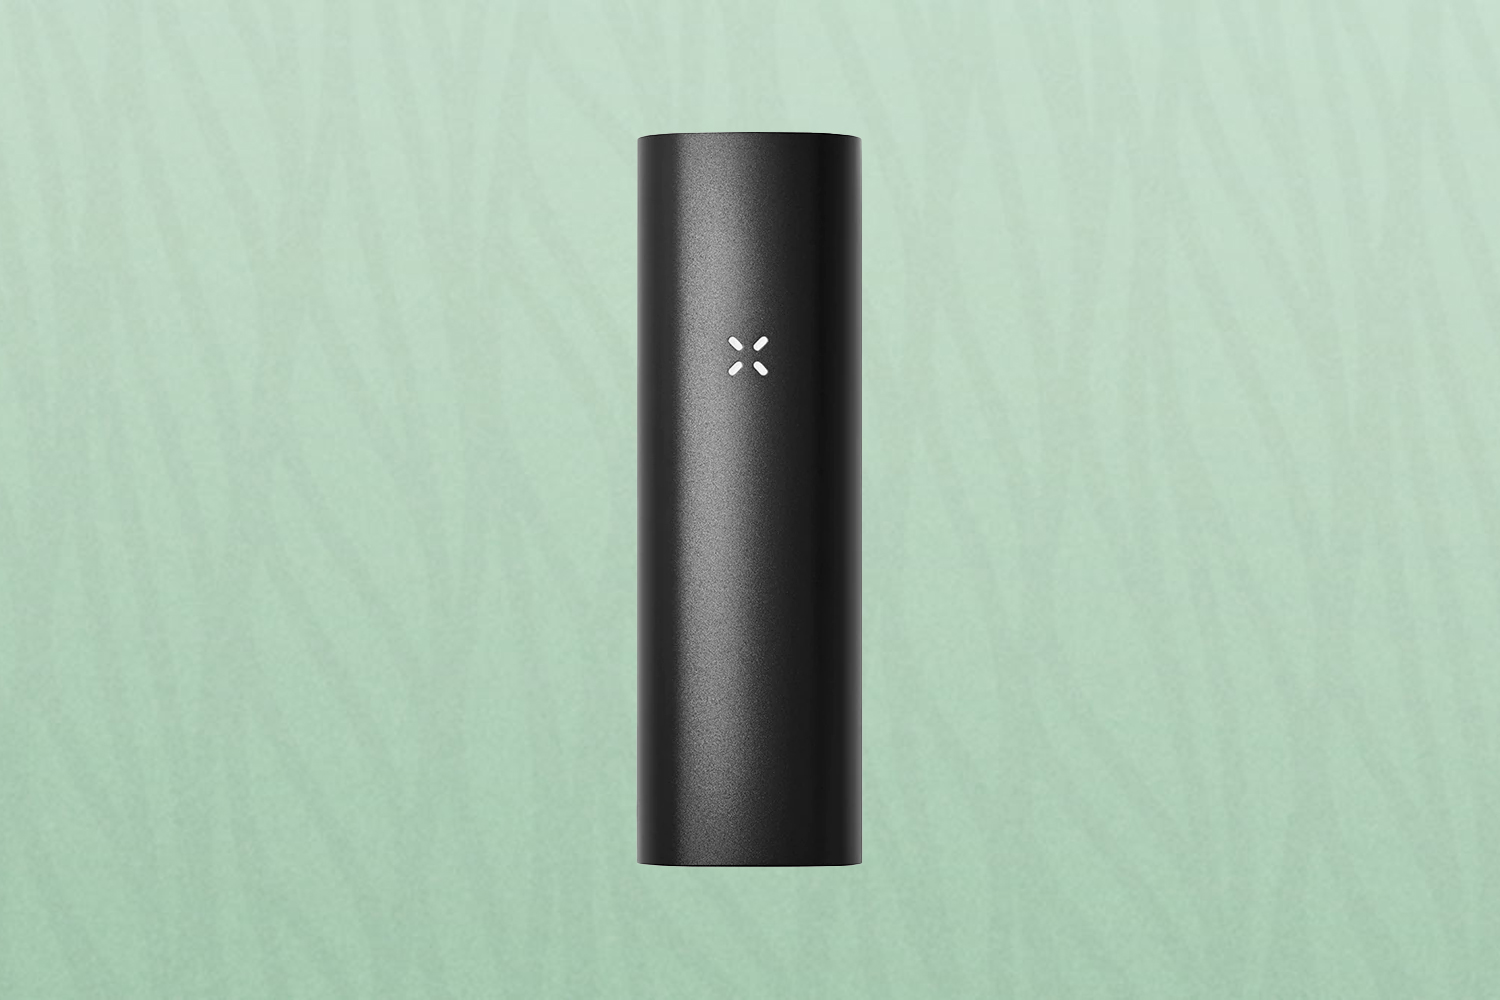 The Pax 3 vaporizer is the best vaporizer in 2022 and the best weed accessory in 2022 for getting high